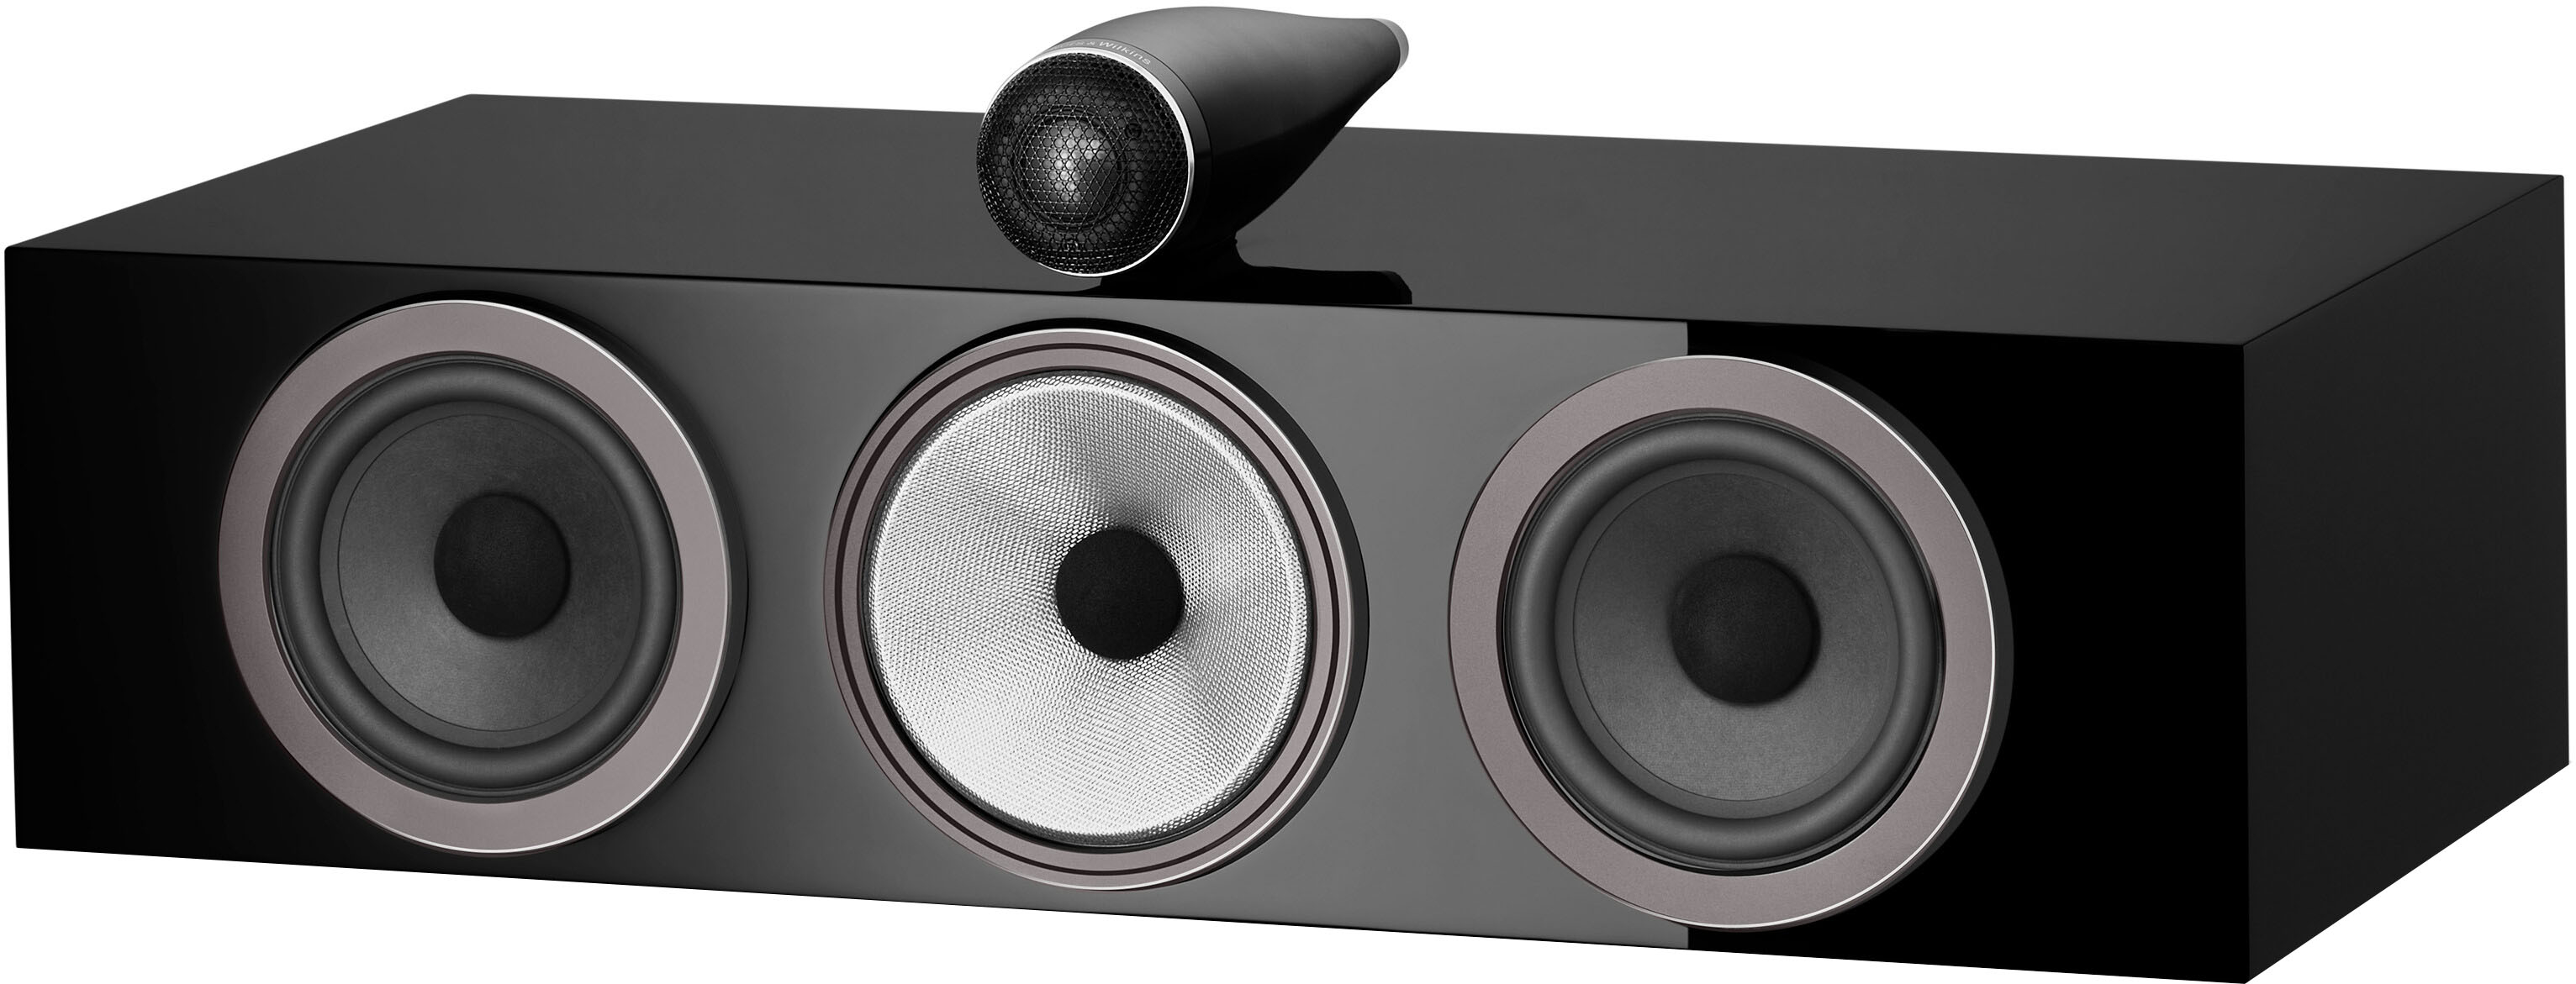 & Wilkins 700 Series 3 Center Channel with 1" Tweeter On Top and Two 6.5" Bass Drivers (Each) Black HTM71S3GlossBlack Best Buy